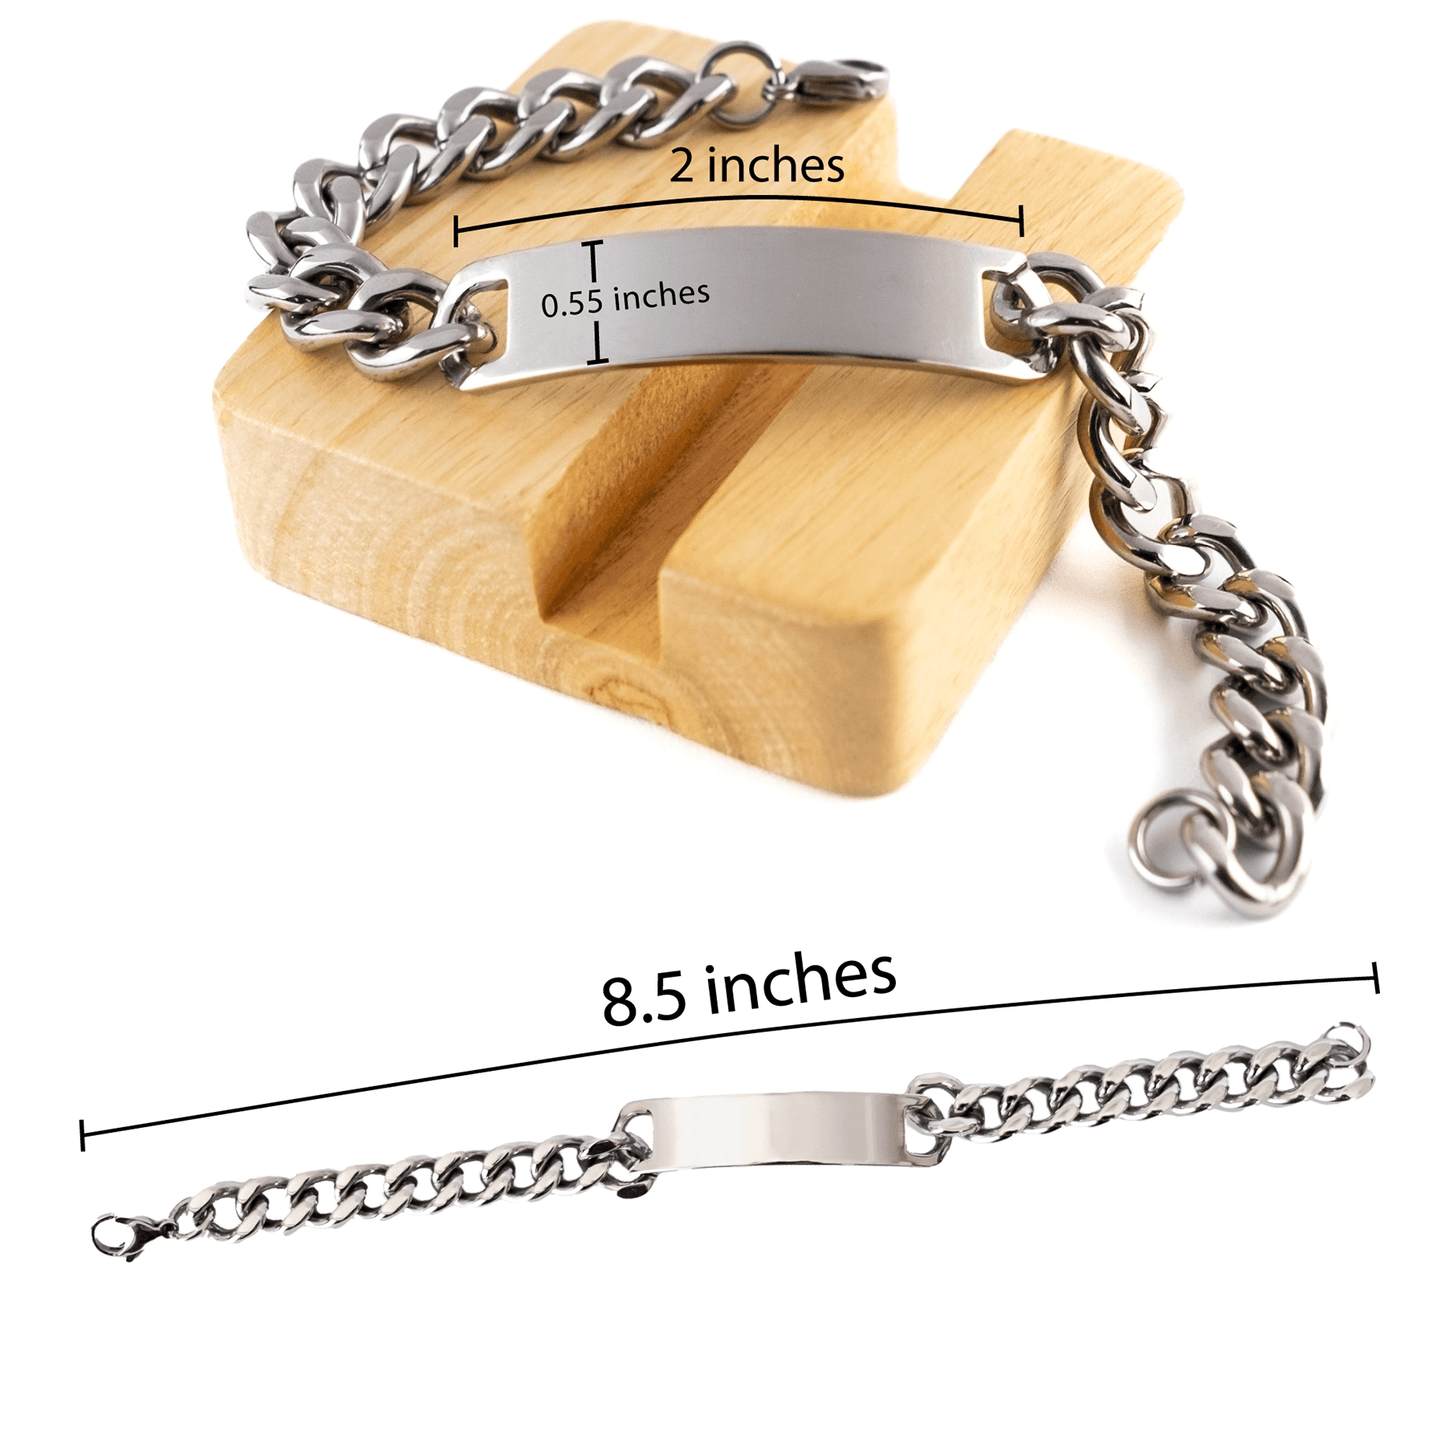 PE Teacher Cuban Chain Link Engraved Bracelet - Thanks for being who you are - Birthday Christmas Jewelry Gifts Coworkers Colleague Boss - Mallard Moon Gift Shop